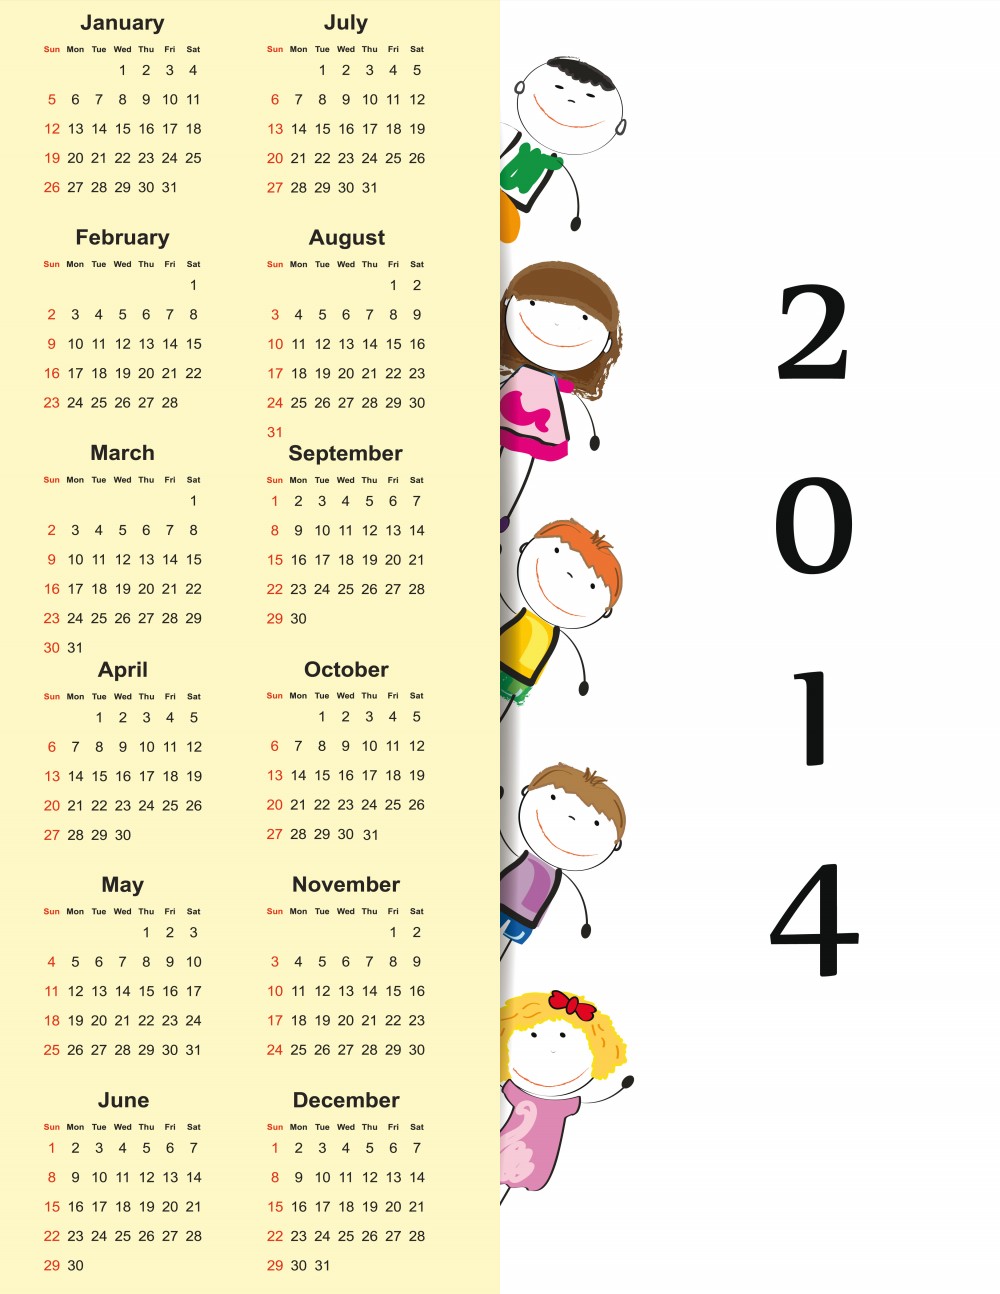 New Year Greetings and Calendars 2014